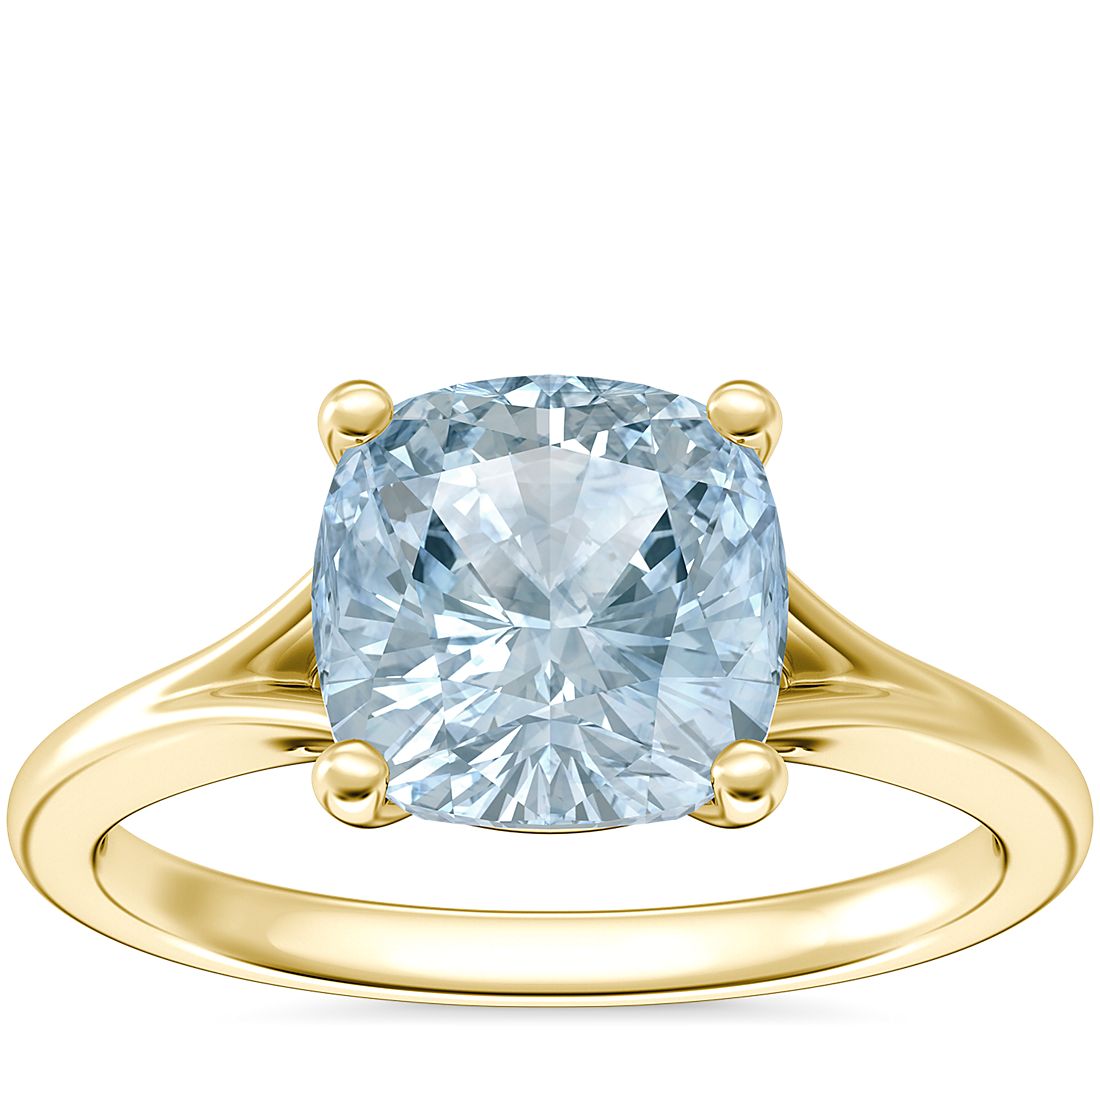 Petite Split Shank Solitaire Engagement Ring with Cushion Aquamarine in 14k Yellow Gold (8mm)